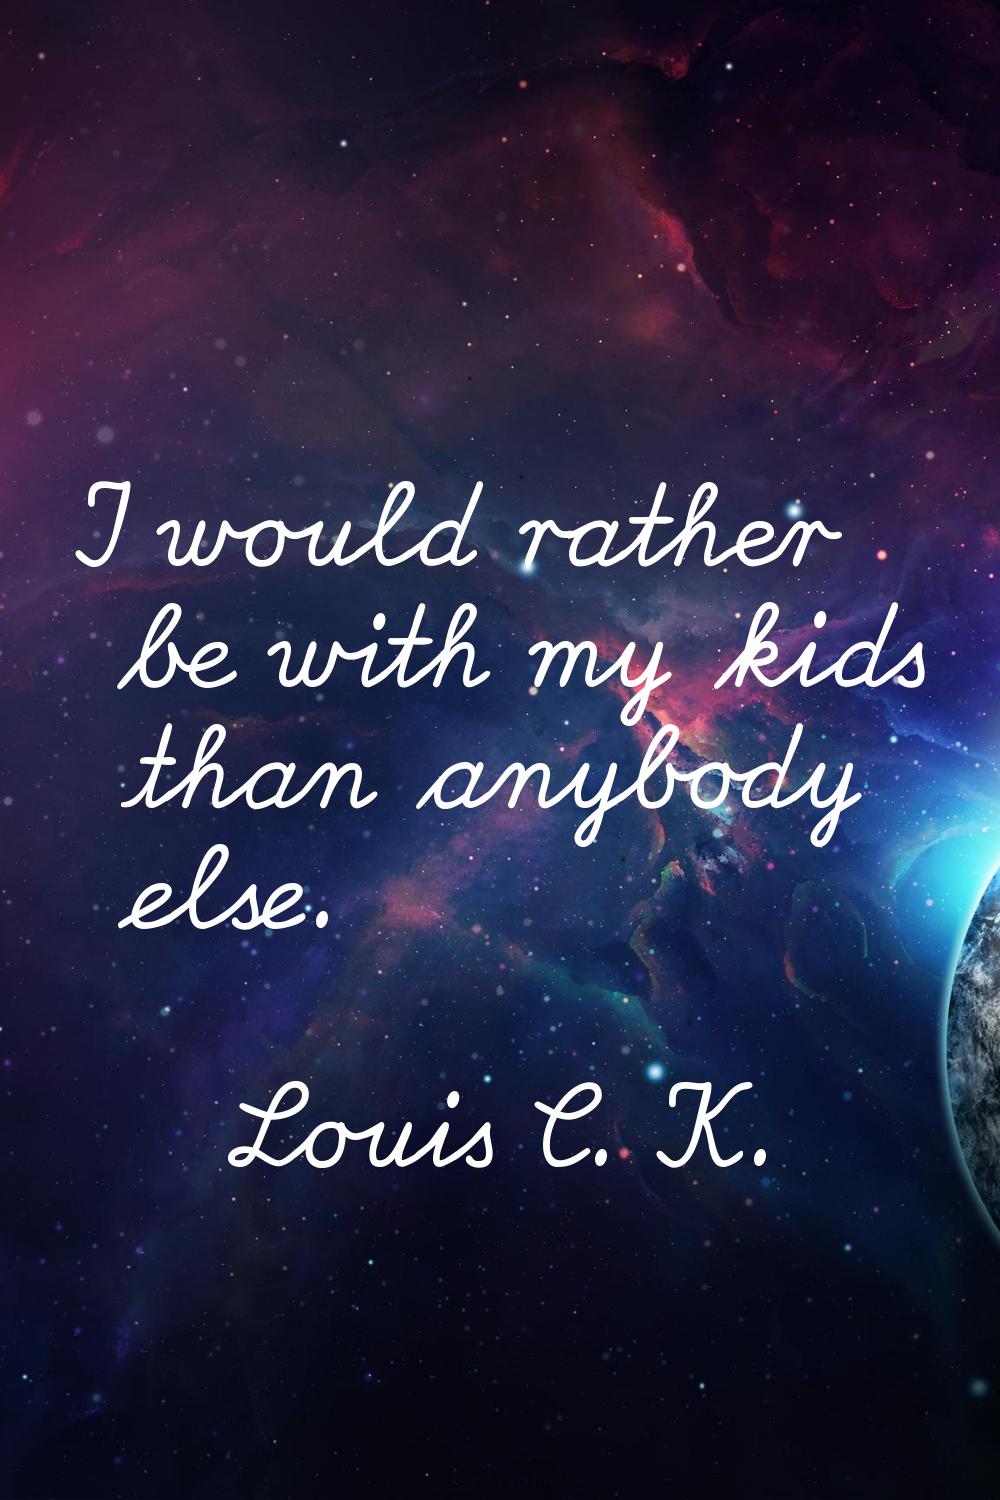 I would rather be with my kids than anybody else.